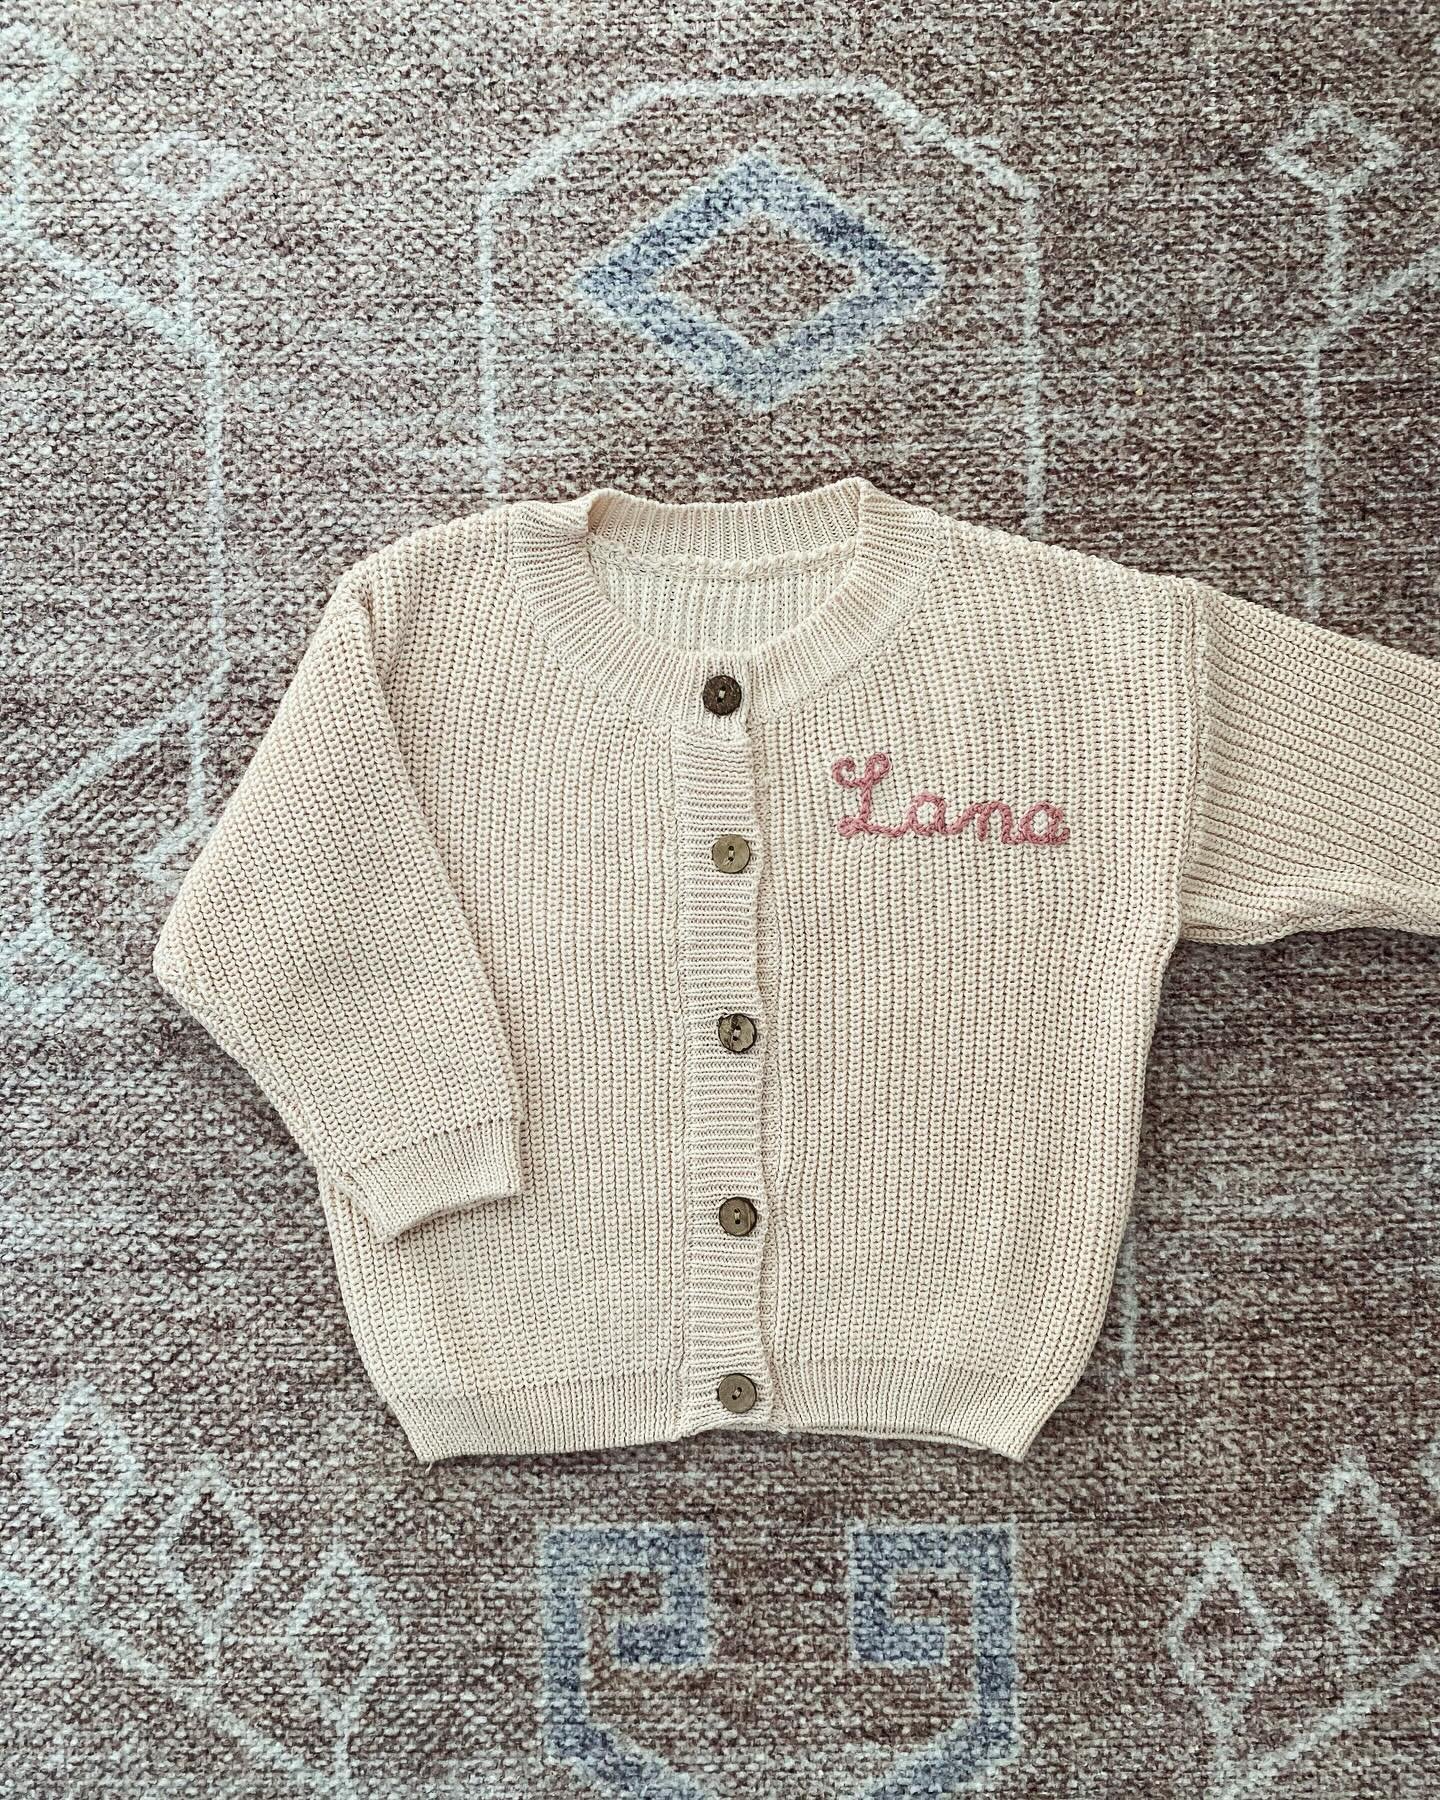 Baby Cardigan aka Cardi B has officially joined the A.R.Threads lineup! 🧵 We&rsquo;ve also added a lil assistant to the crew - he&rsquo;s still working on his timing but practice makes perfect 🥰👶🏻

Apparel Bundle for Lana 💕 Welcome to the world 